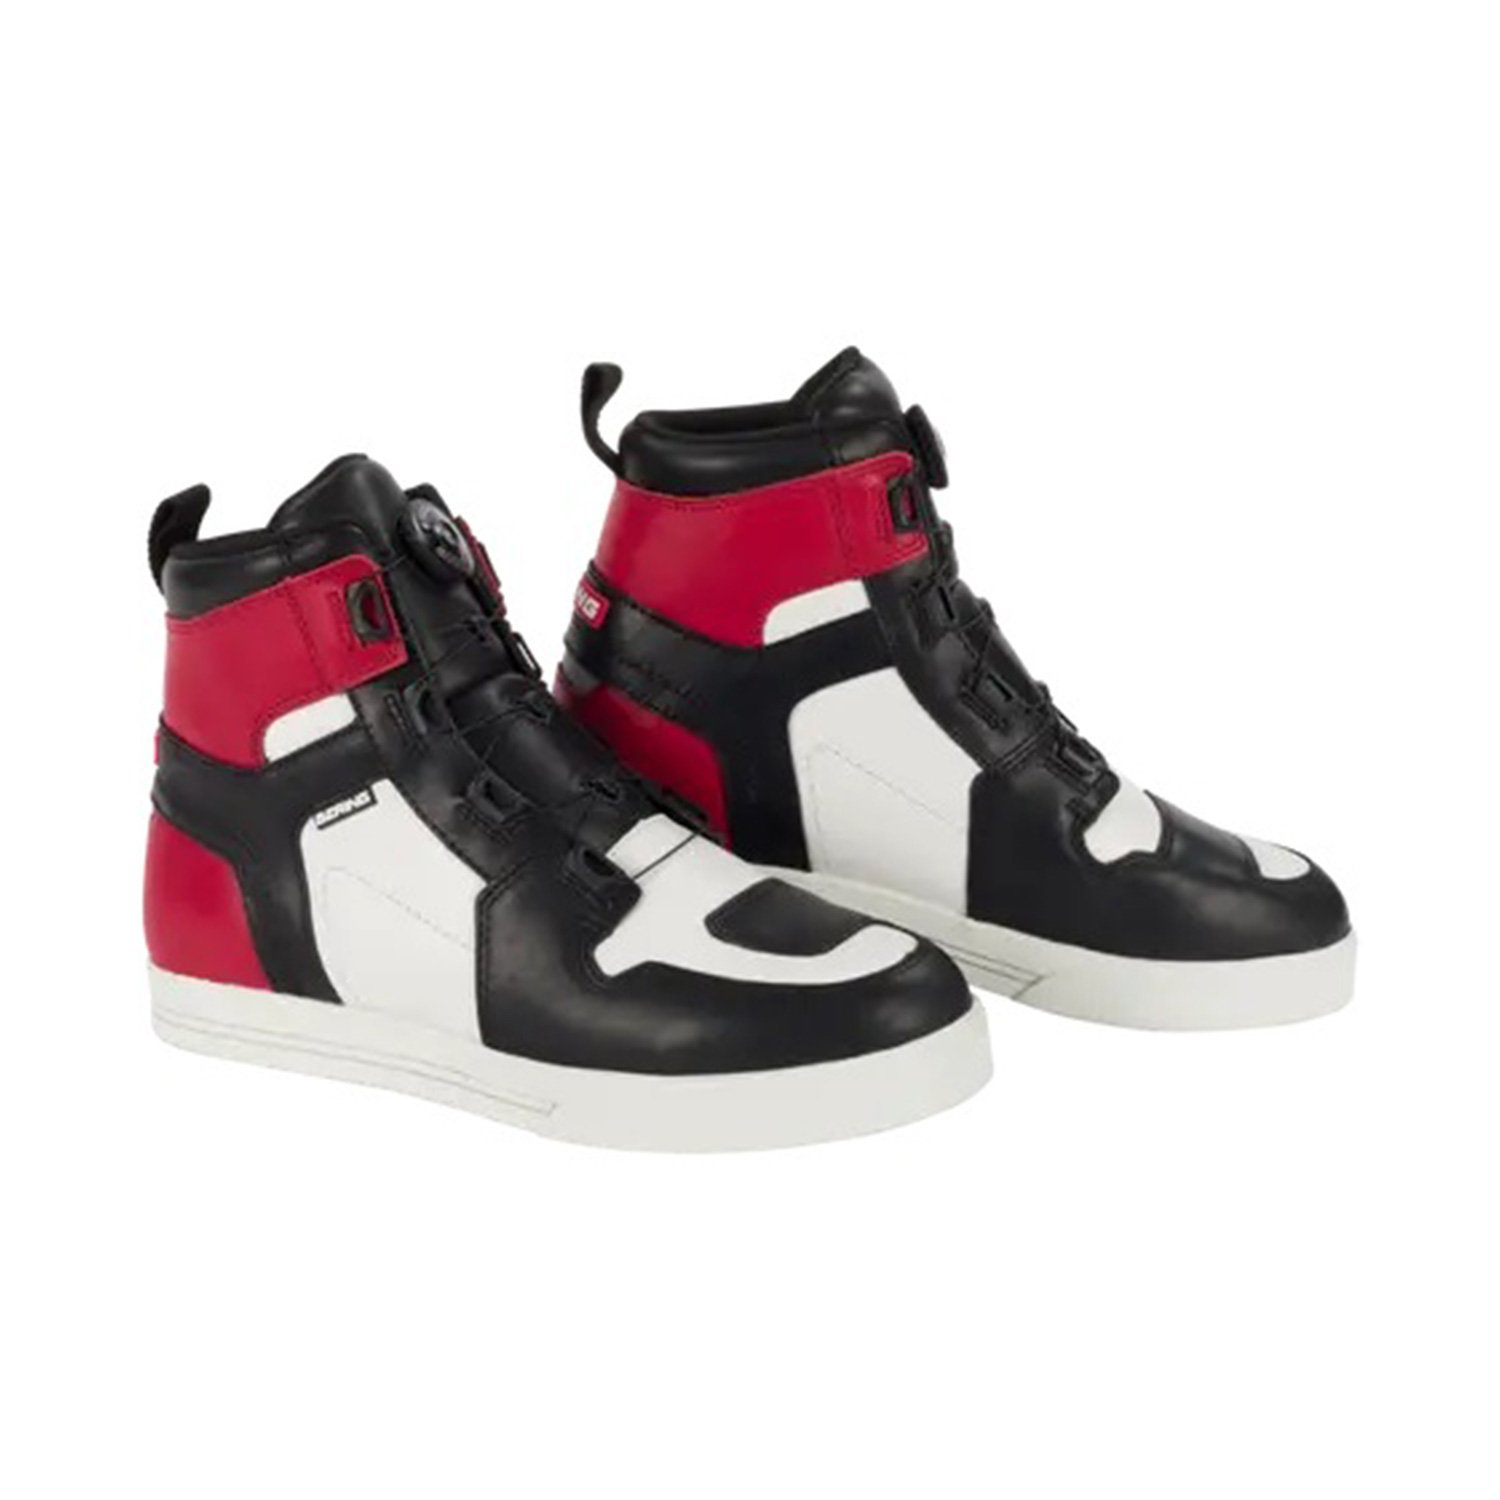 Image of Bering Sneakers Reflex A-Top Black White Red Size 41 ID 3660815176672